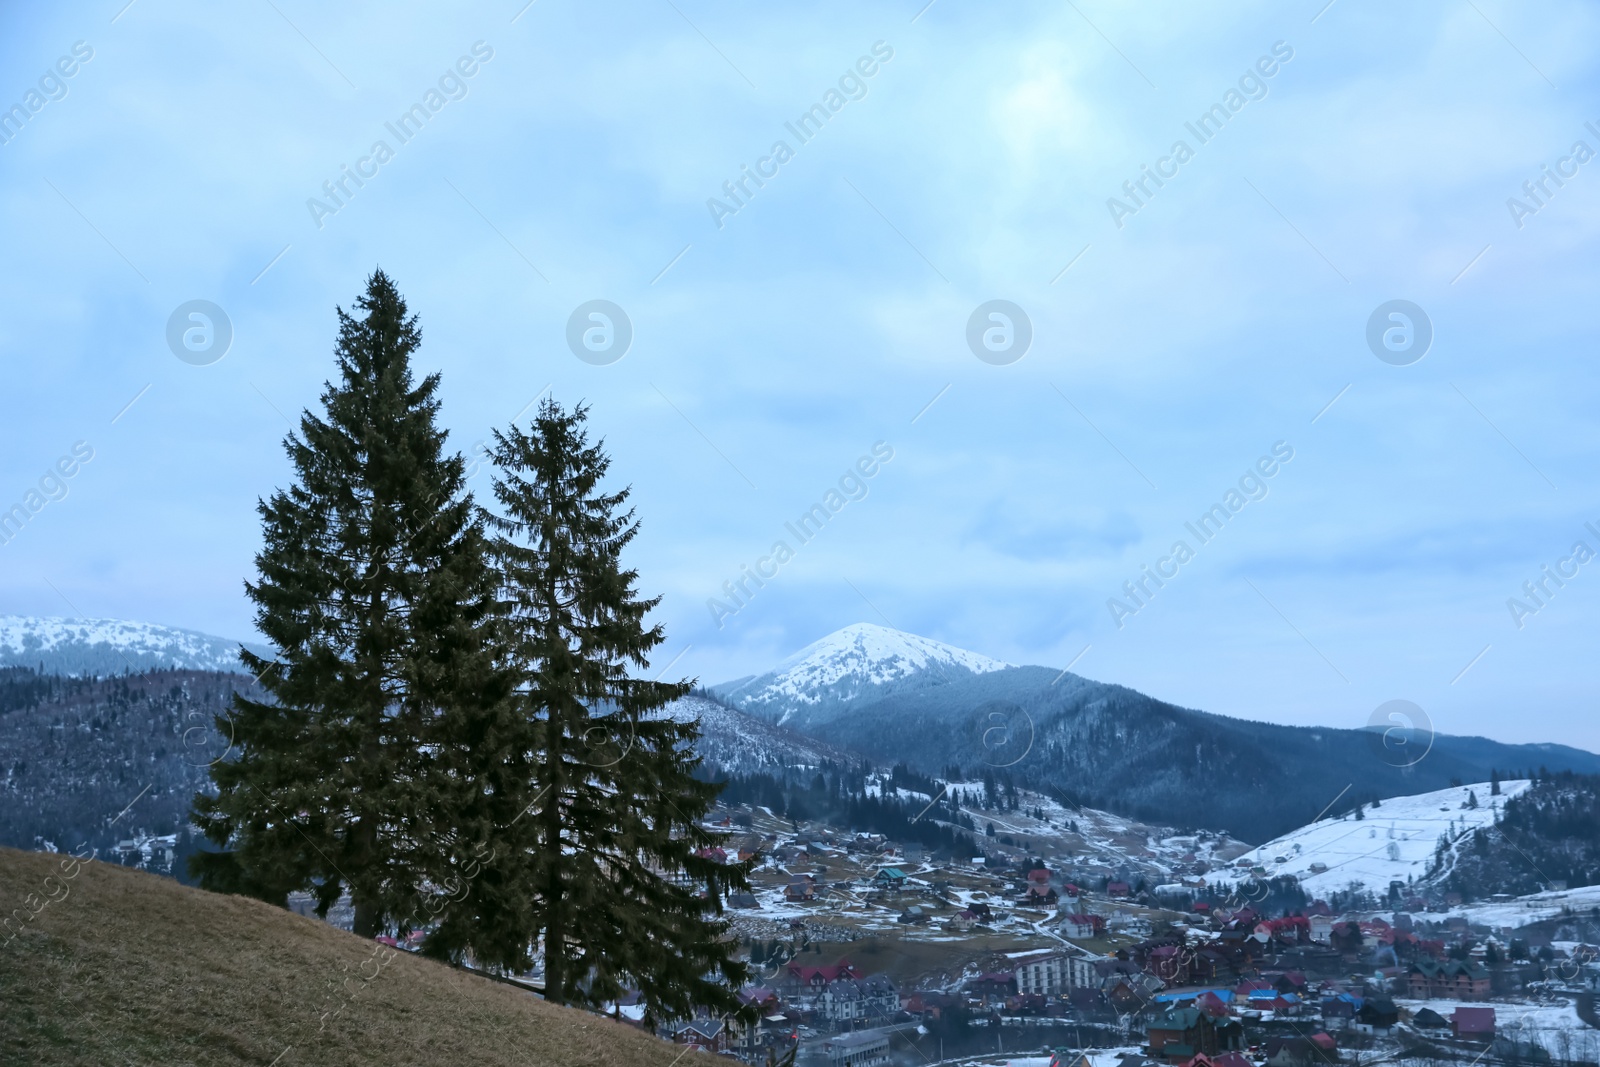 Photo of Fir trees near mountain village covered with snow